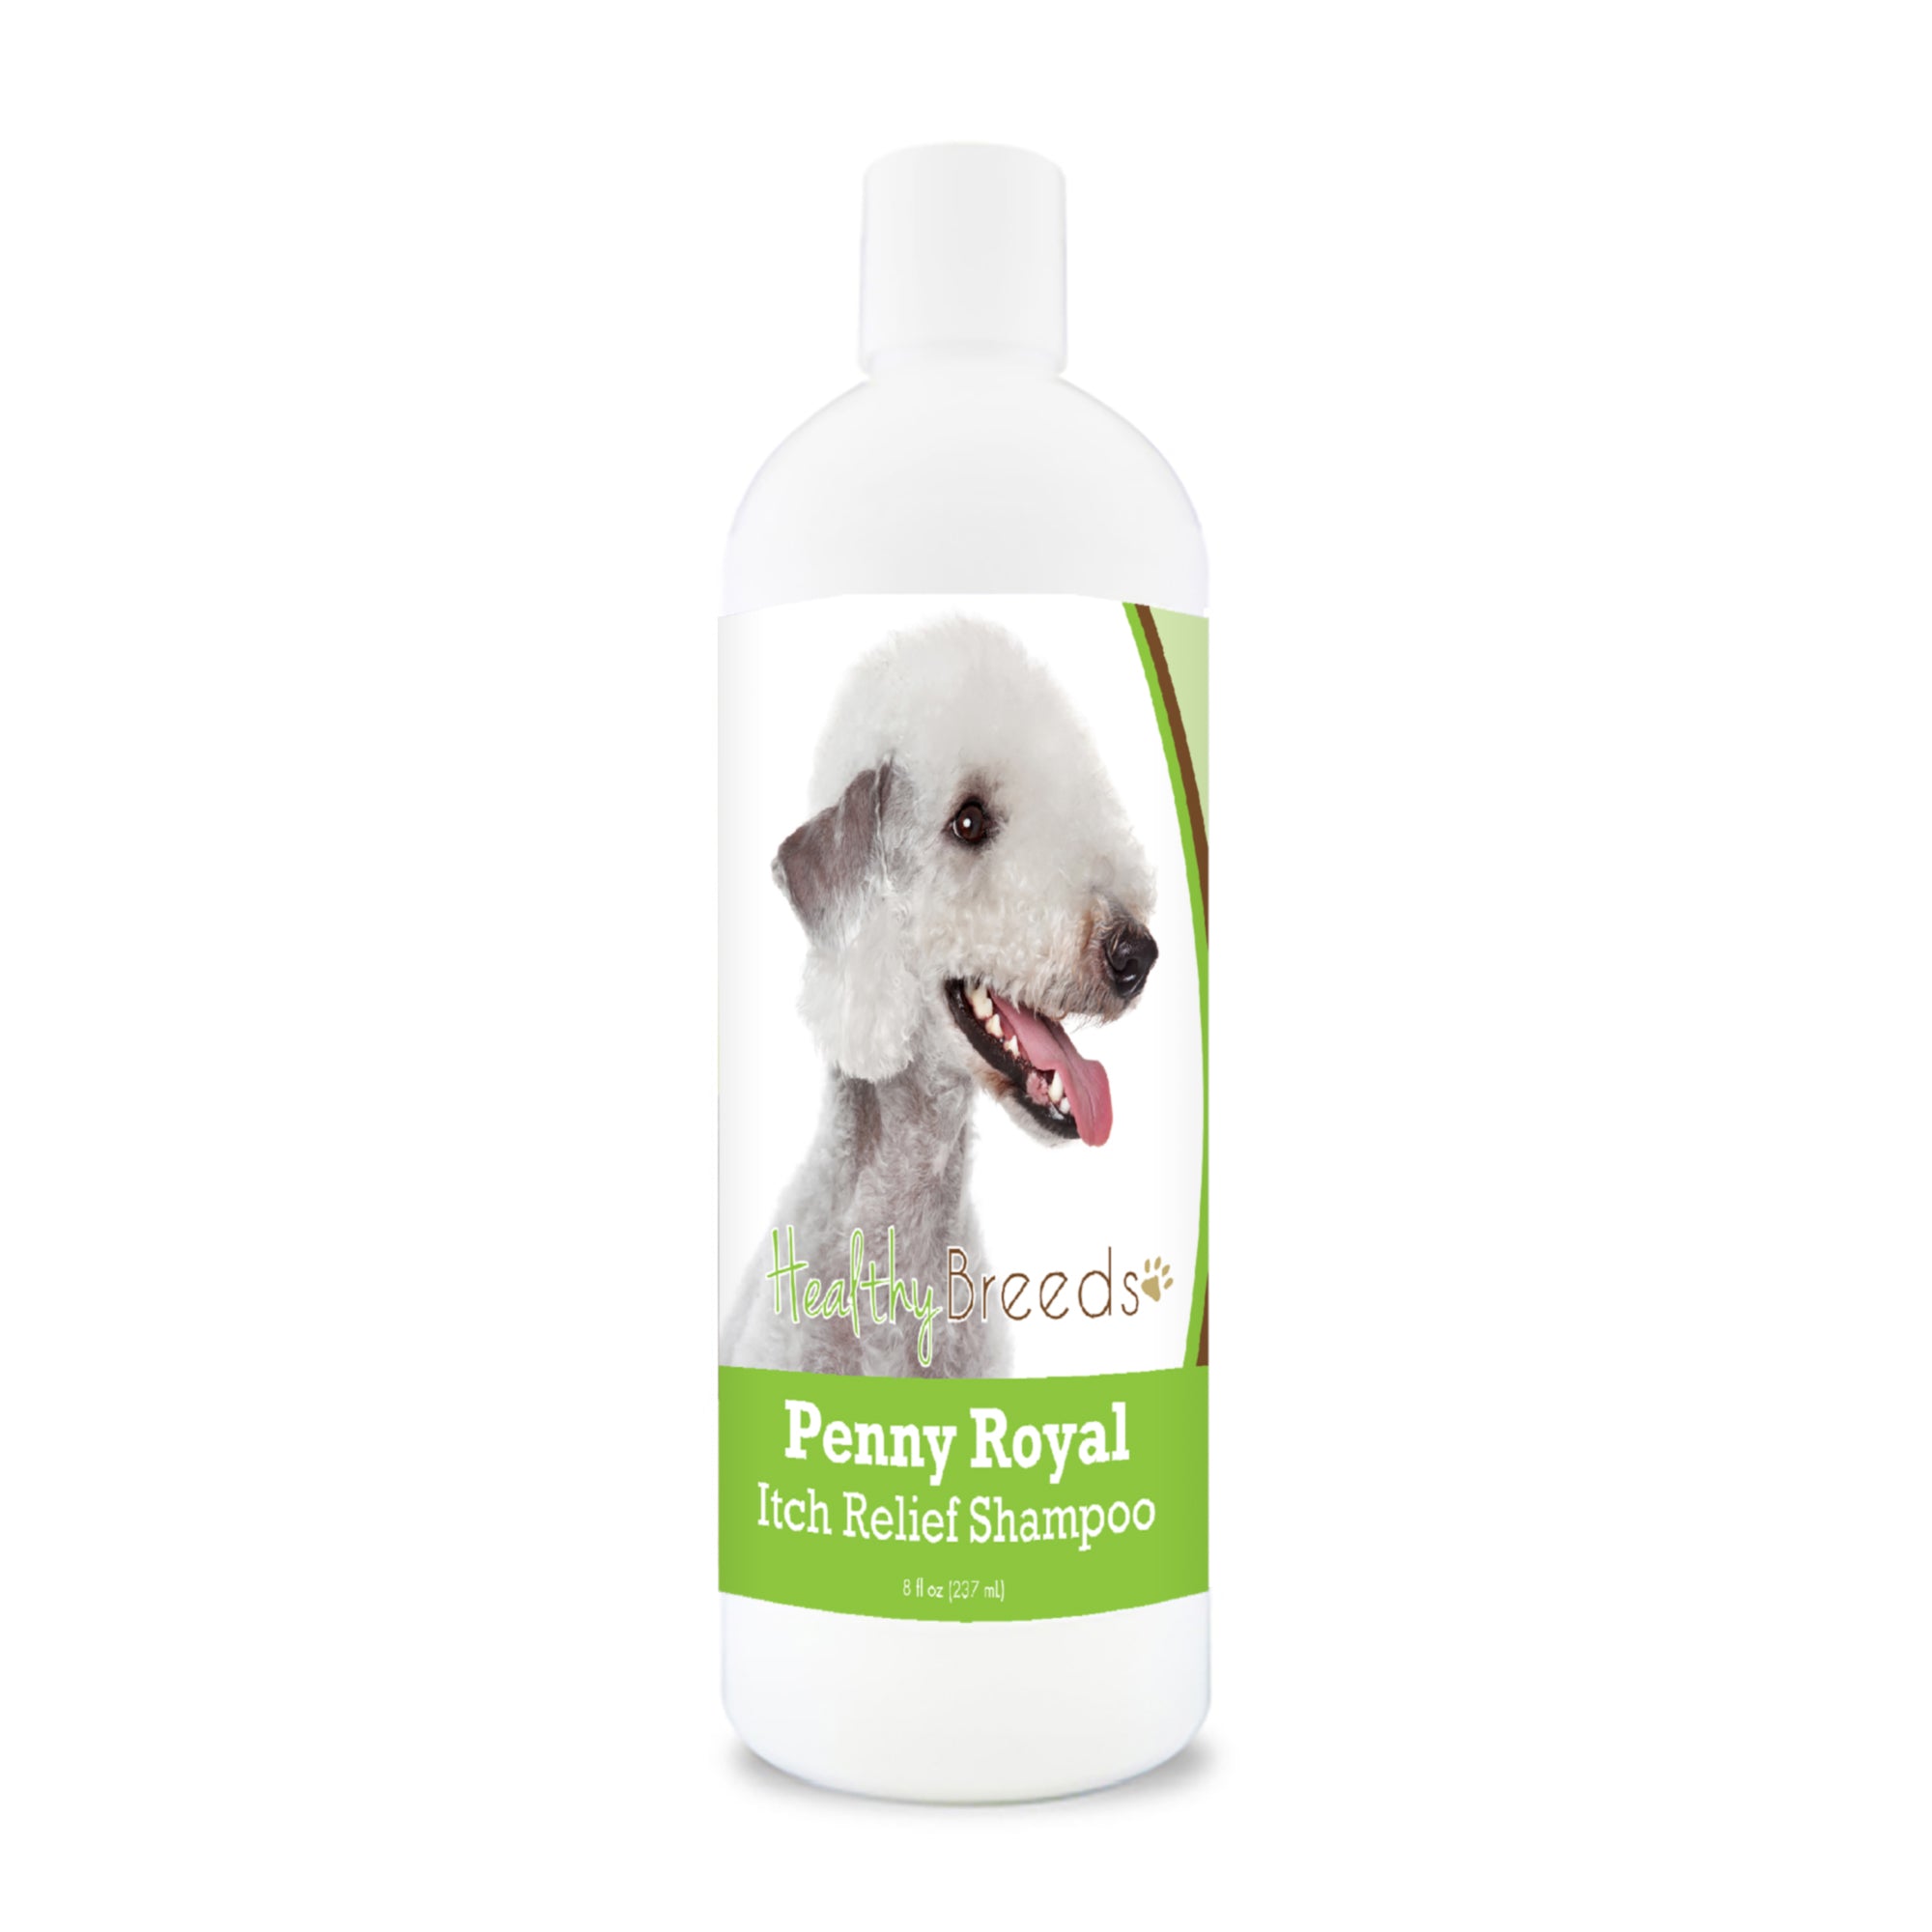 Bedlington Terrier Penny Royal Itch Relief Shampoo 8 oz